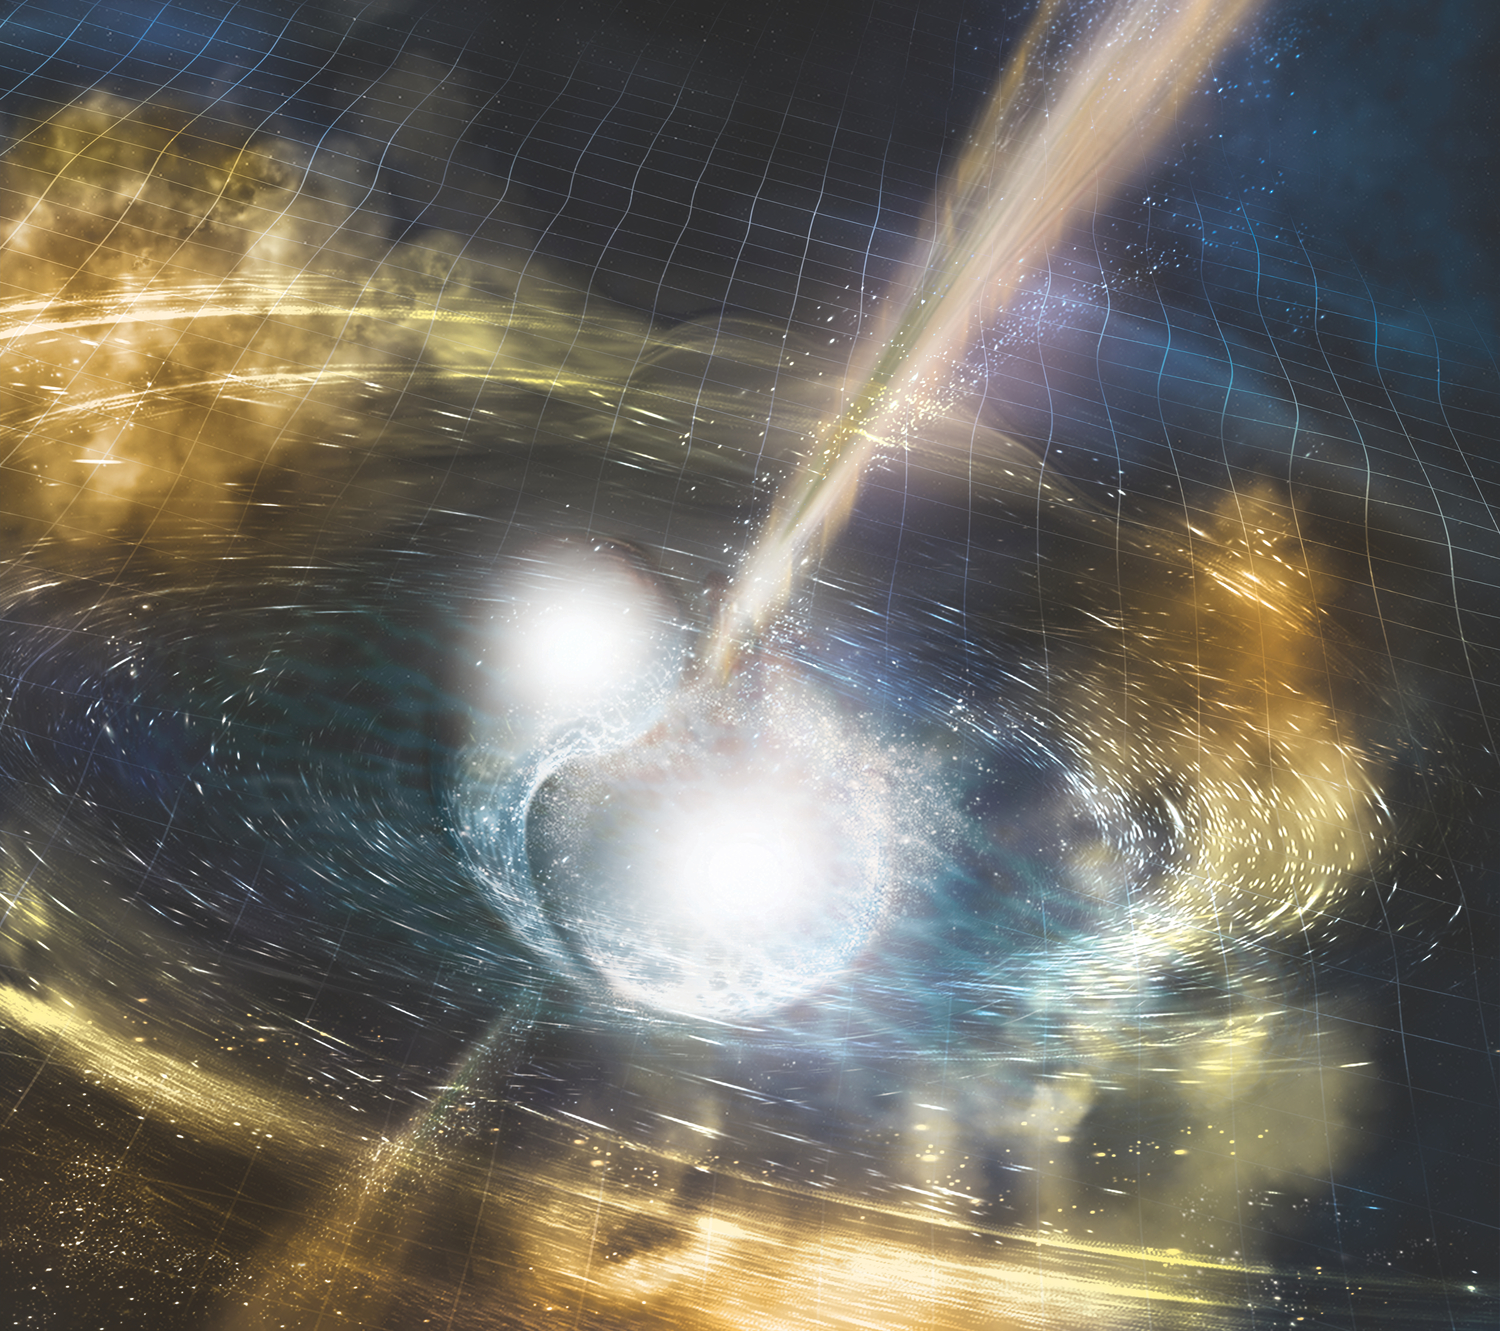 Image - Artist’s illustration of two merging neutron stars. The rippling space-time grid represents gravitational waves that travel out from the collision, while the narrow beams show the bursts of gamma rays that are shot out just seconds after the gravitational waves. Swirling clouds of material ejected from the merging stars are also depicted. The clouds glow with visible and other wavelengths of light. (Credit: NSF/LIGO/Sonoma State University/A. Simonnet)